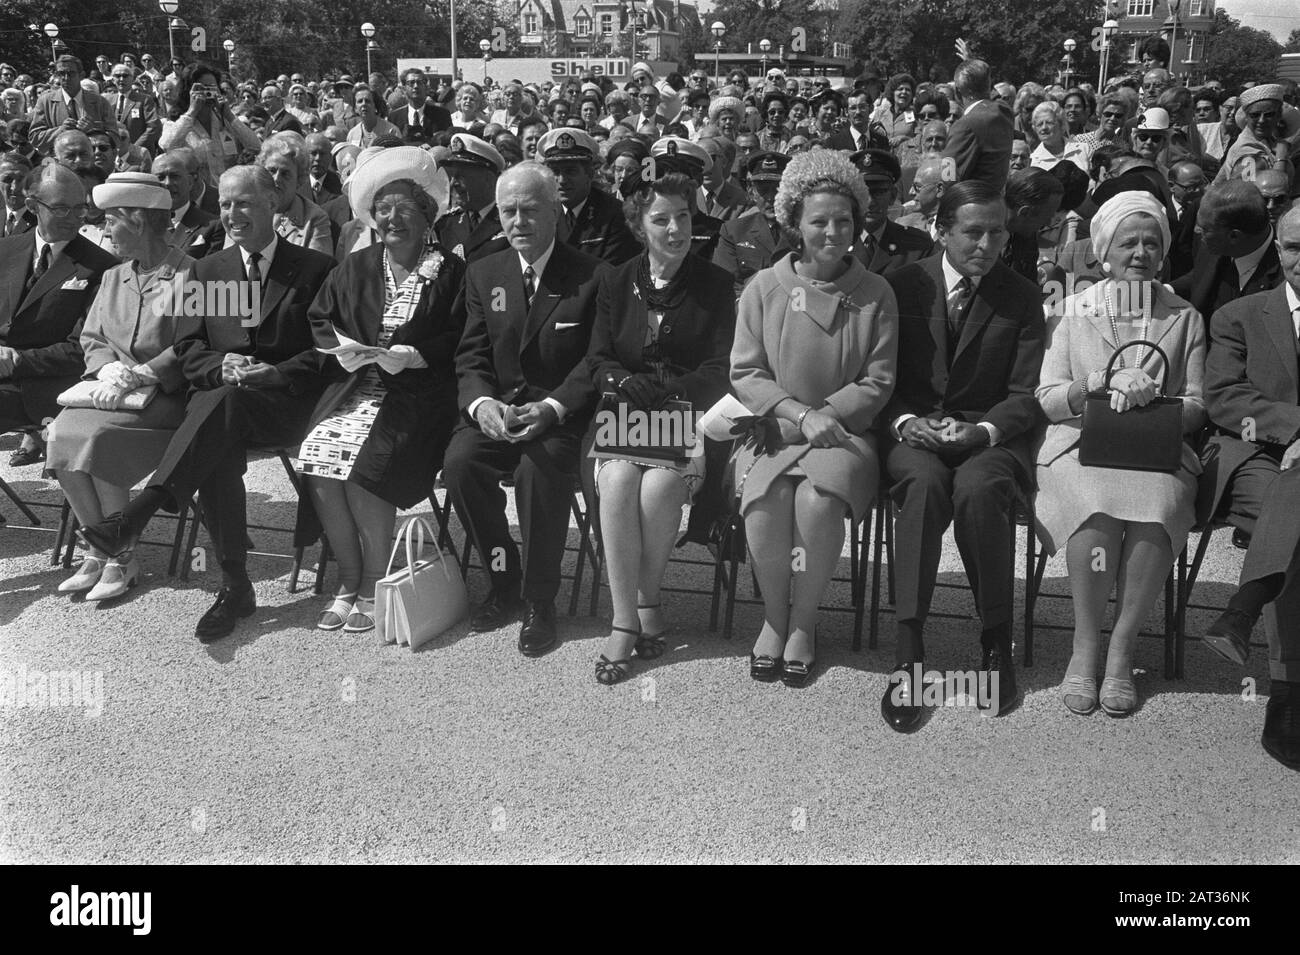 Commemoration due to the end of war 25 years Z-O-Asia, in Congresgebouw The Hague, with queen Juliana, Beatrix and Claus Date: 15 august 1970 Location: The Hague, Zuid-Holland Keywords: commemorations, queens Personal name: Beatrix, princess, Claus, prince, Juliana (queen Netherlands) Stock Photo